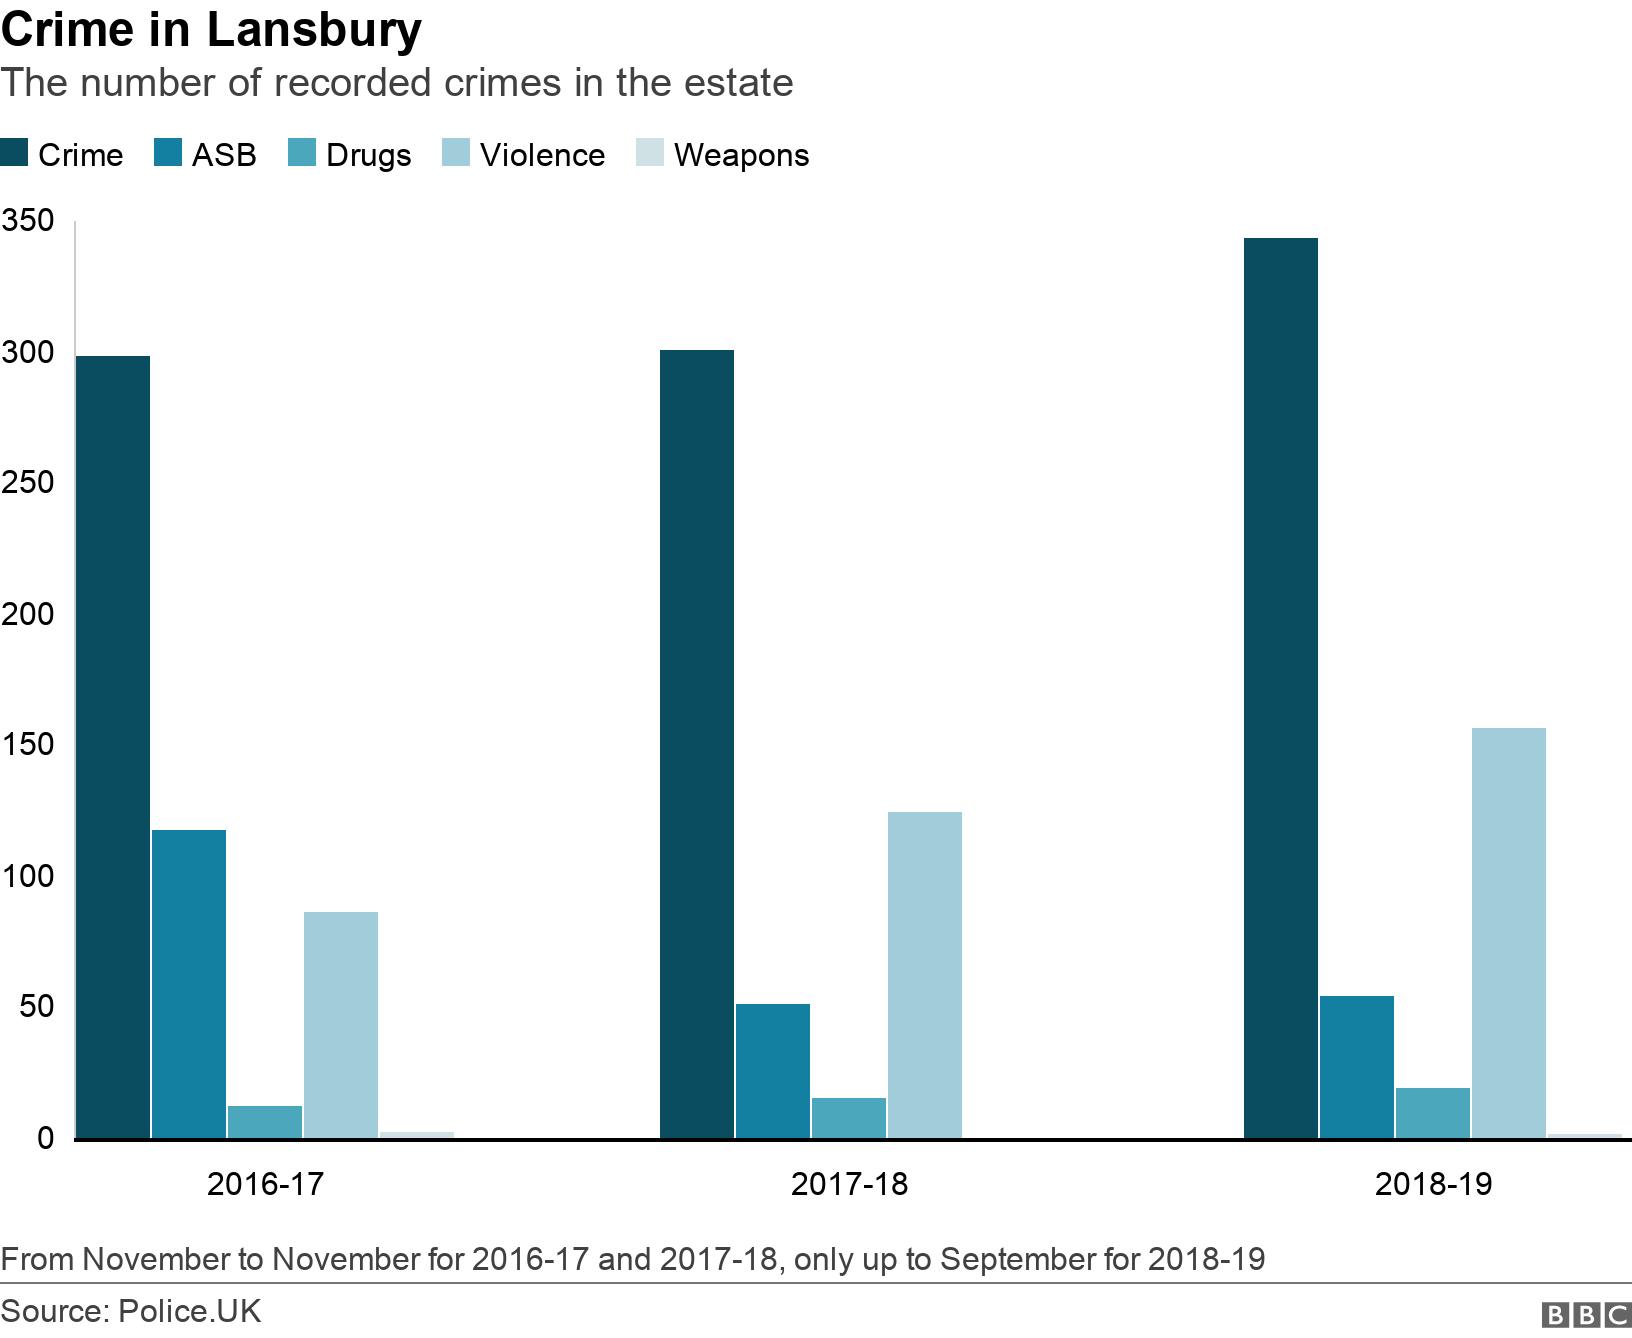 Crime in Lansbury. The number of recorded crimes in the estate. bar chart showing the types of recorded crime on the estate From November to November for 2016-17 and 2017-18, only up to September for 2018-19.